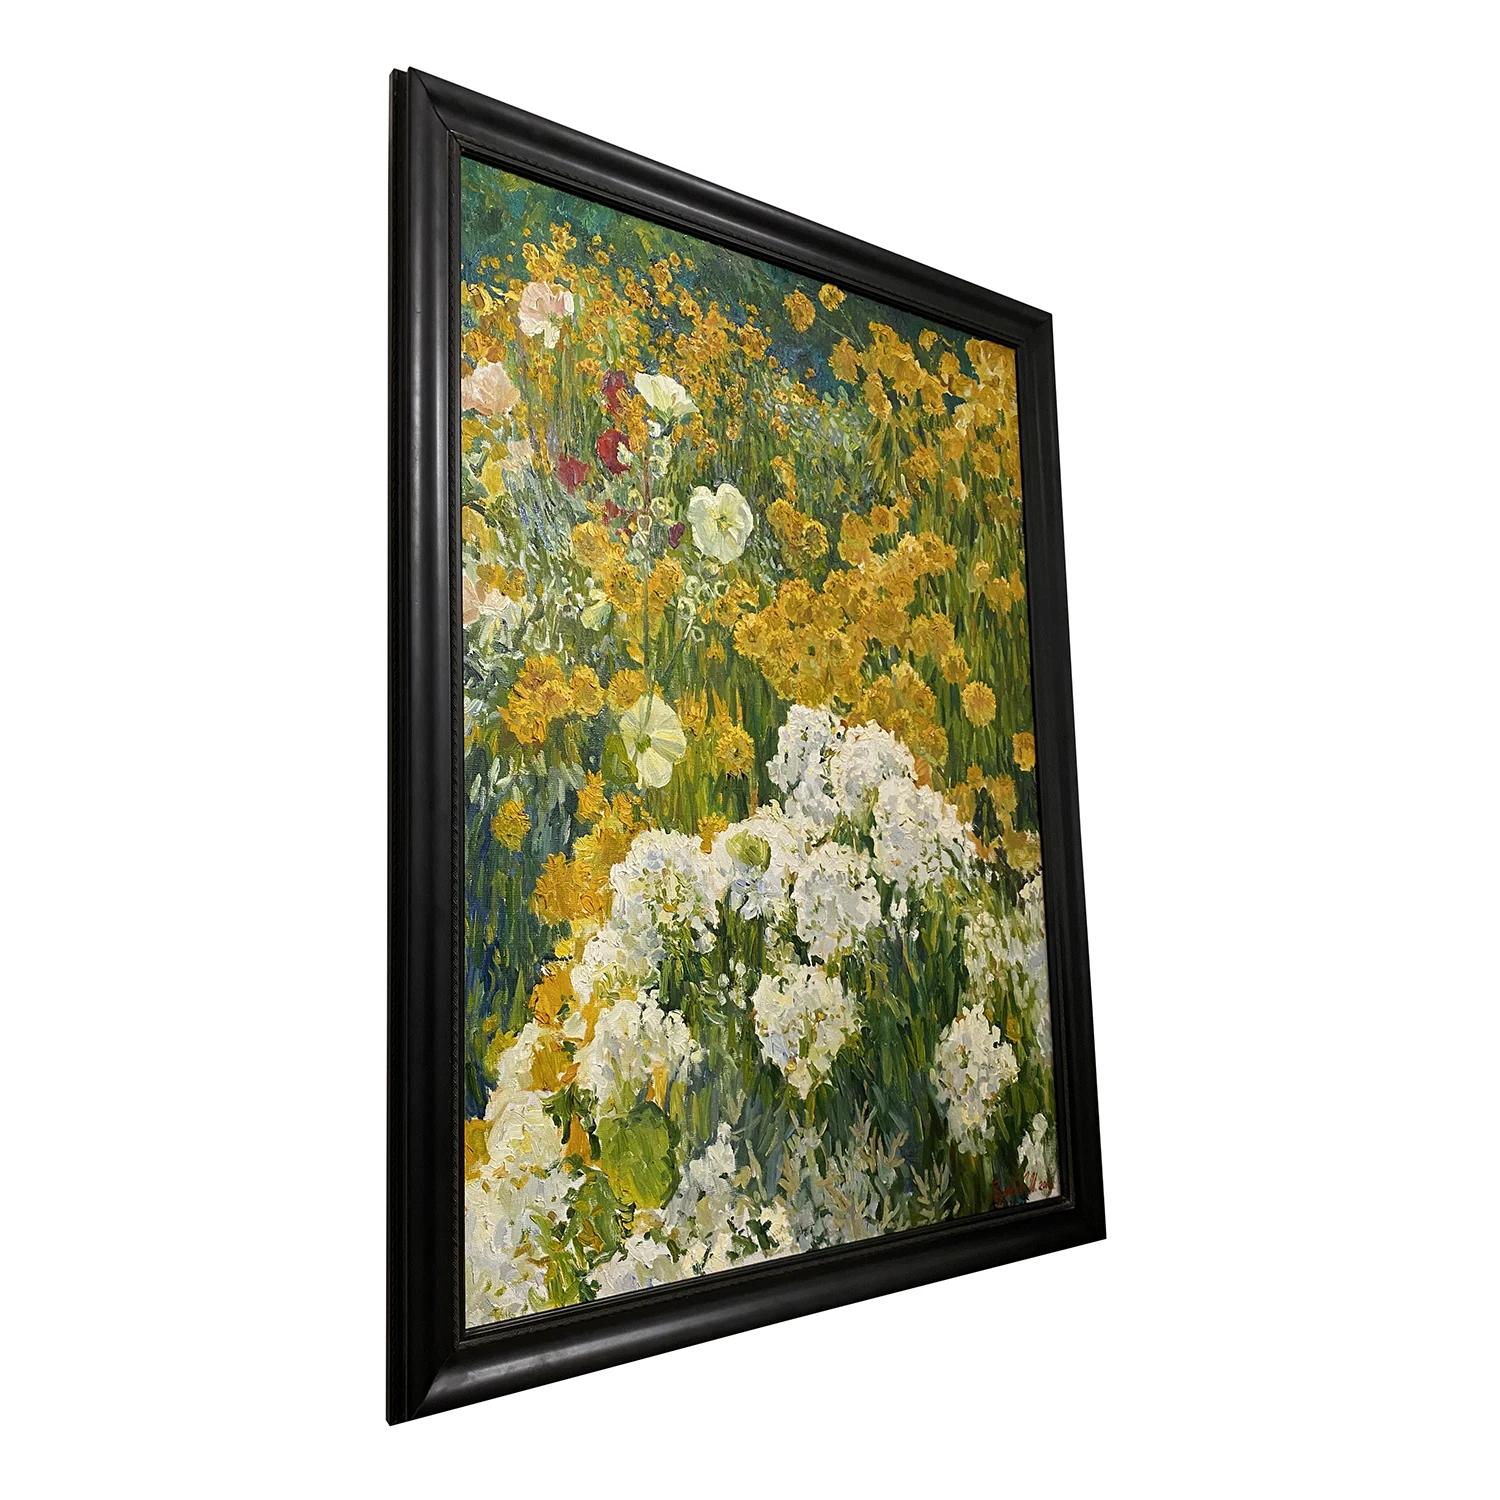 A yellow-white Russian still life oil on canvas painting depicting a sunflower field, painted by Yarovoy Igor in a black wooden frame, in good condition. The colorful landscape painting is portraying a sunny day with many dandelions. Signed on the